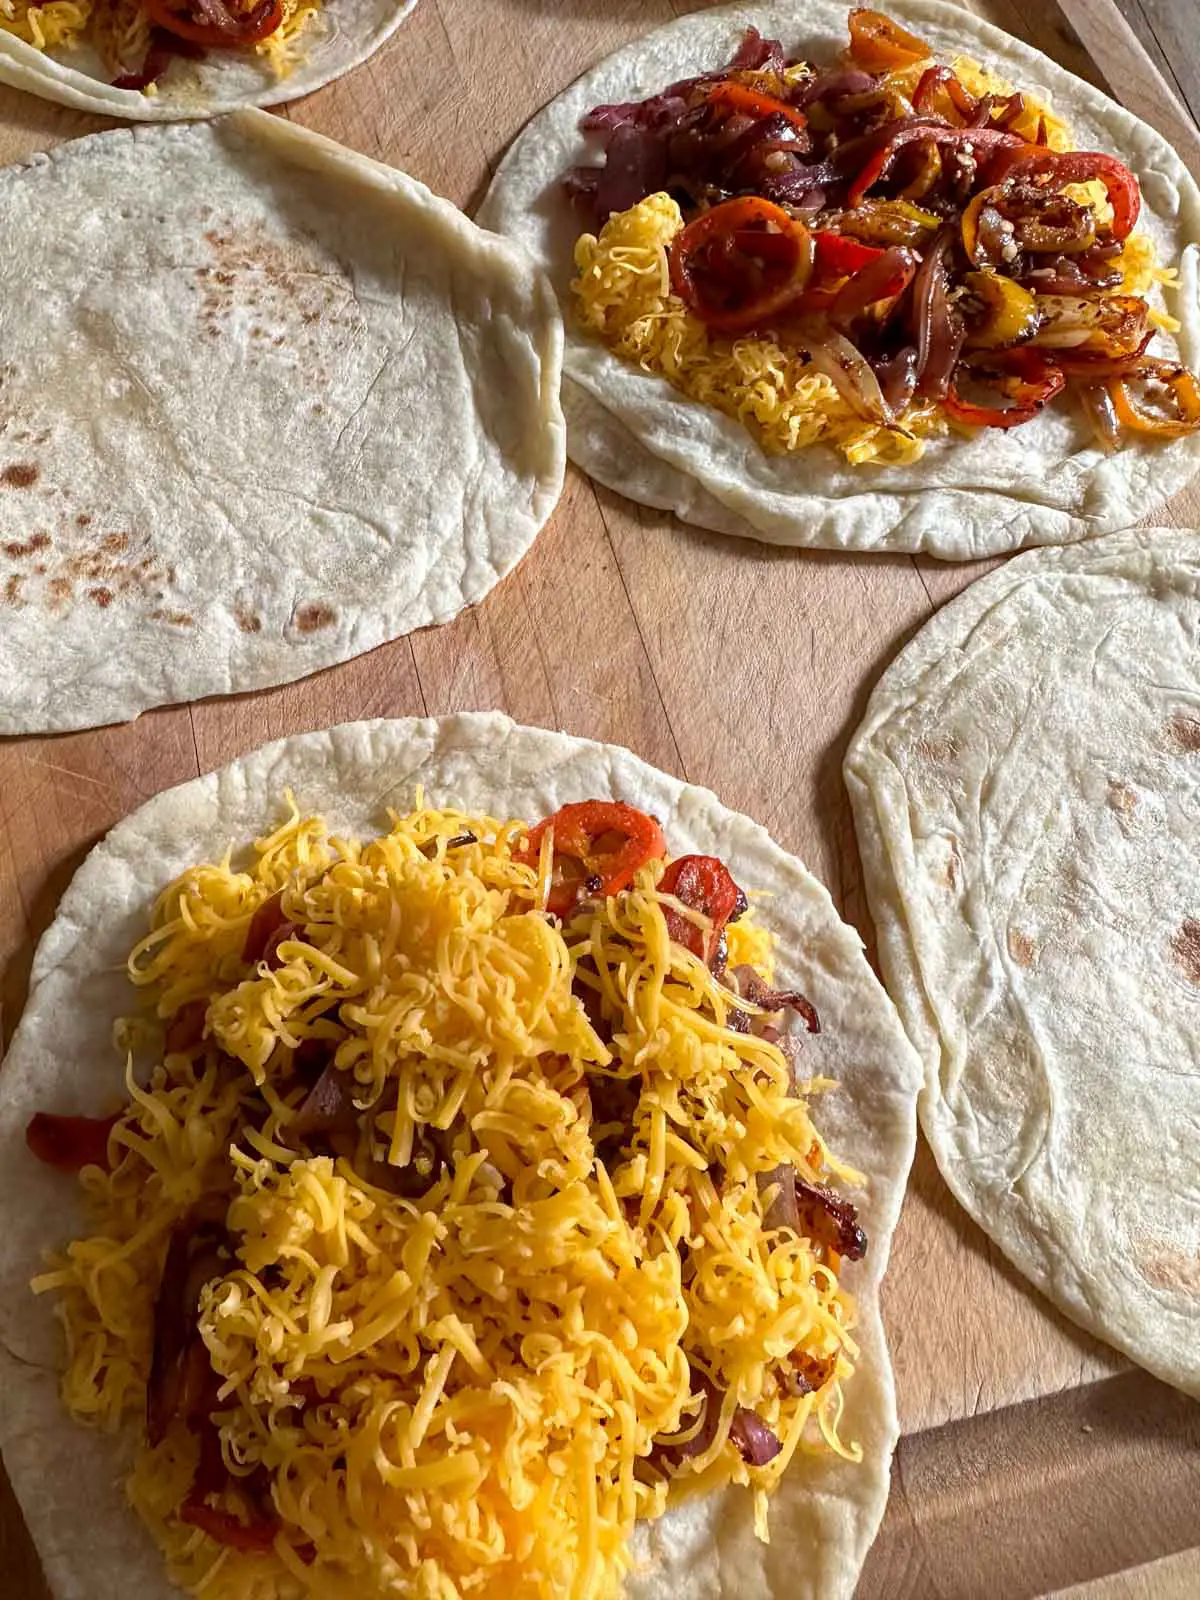 Tortillas placed on a wooden cutting board. 2 of the tortillas are topped with shredded cheese and a sautéed vegetable mixture.